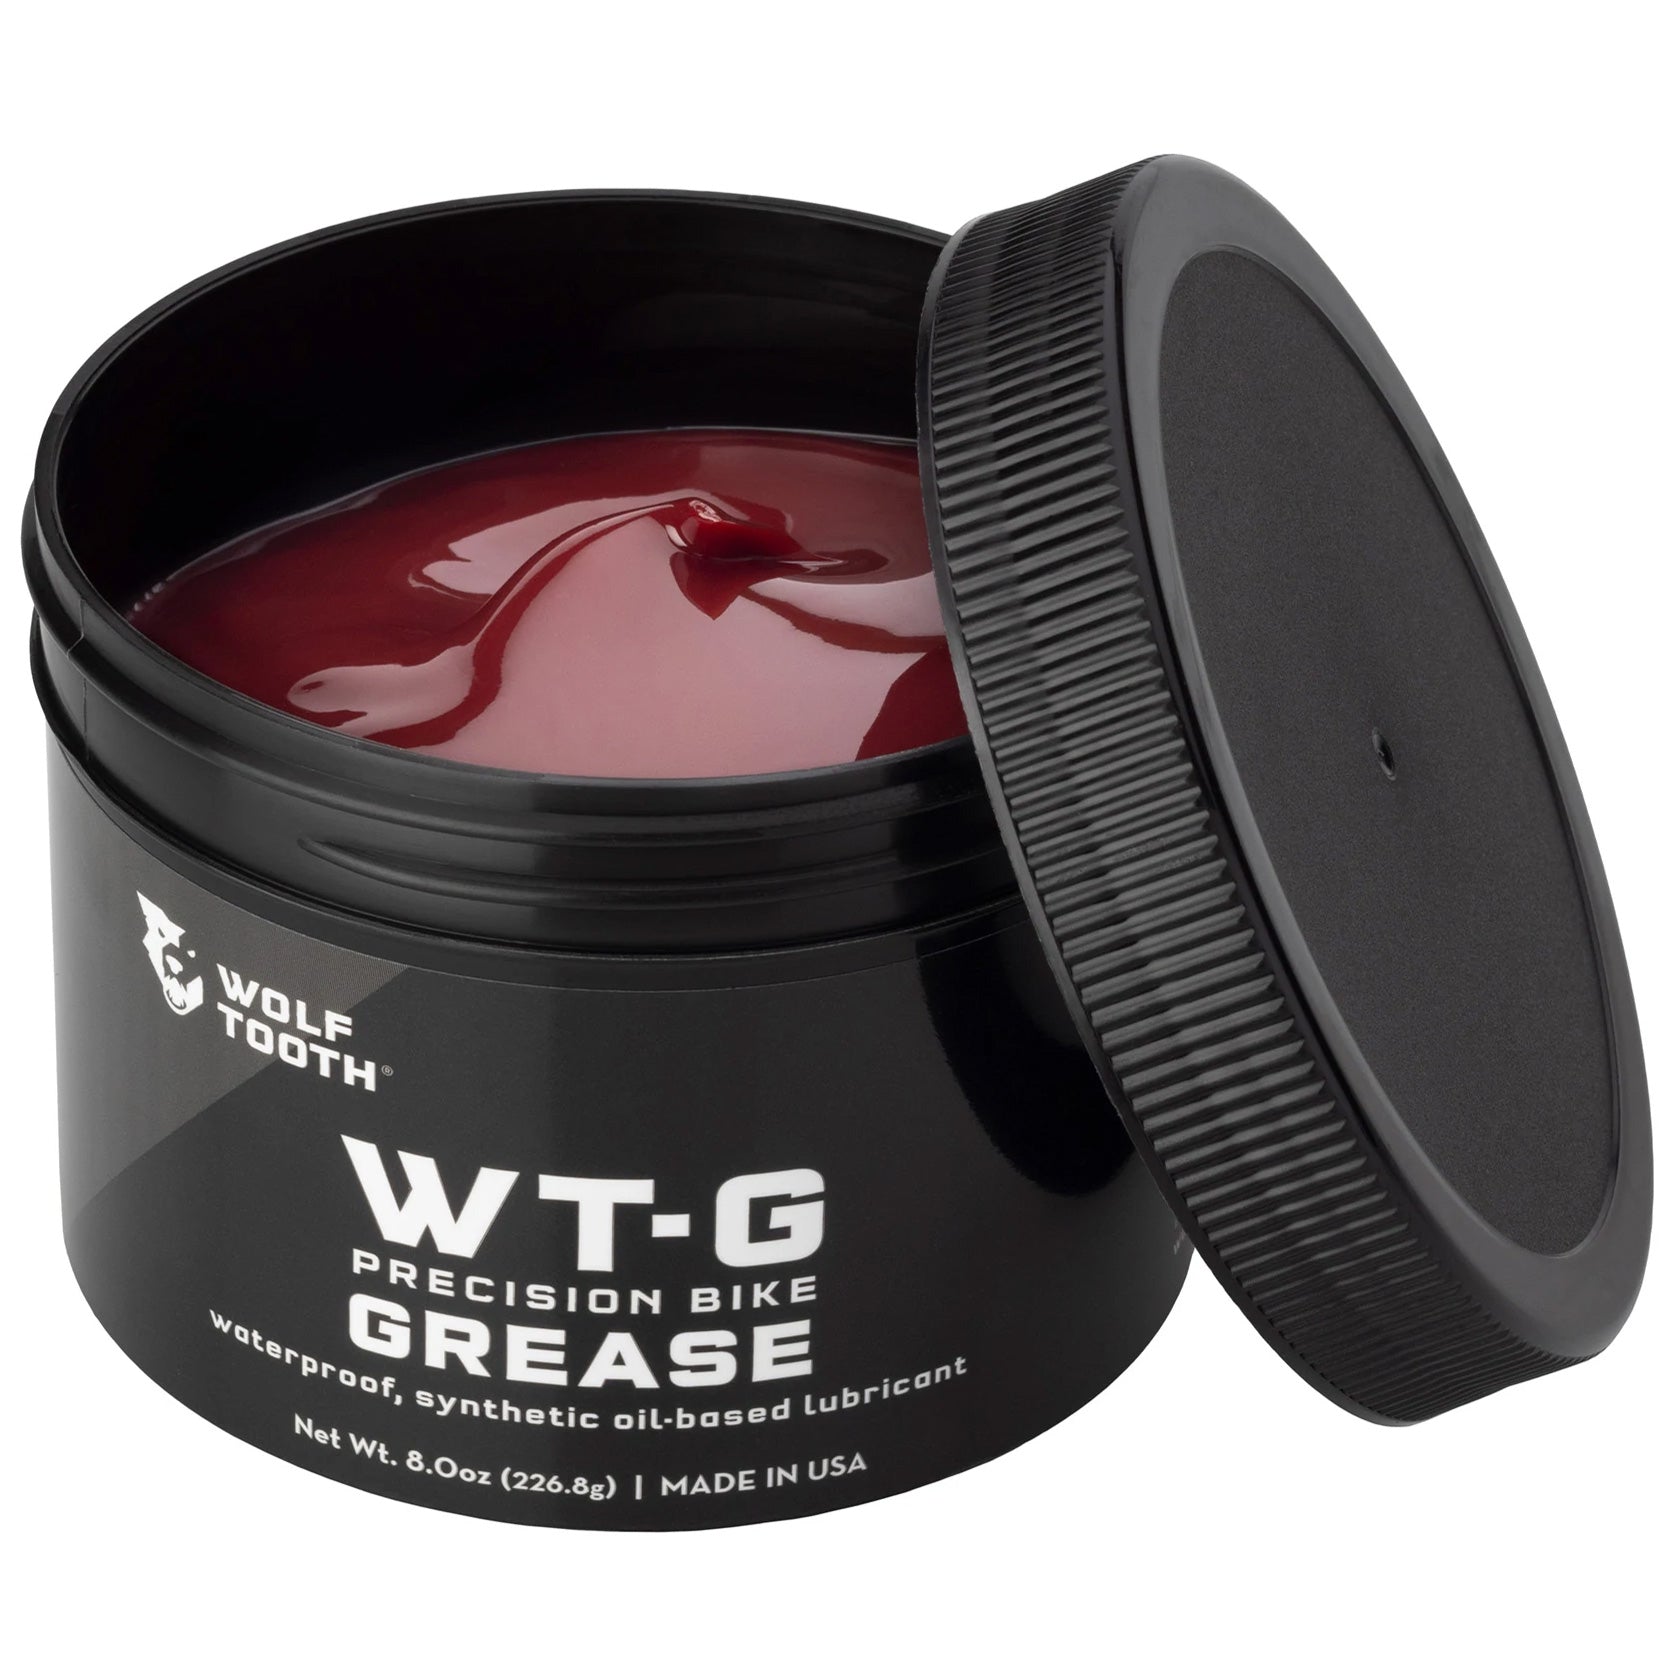 Wolf Tooth Components WT-G Precision Bike Grease - 8oz